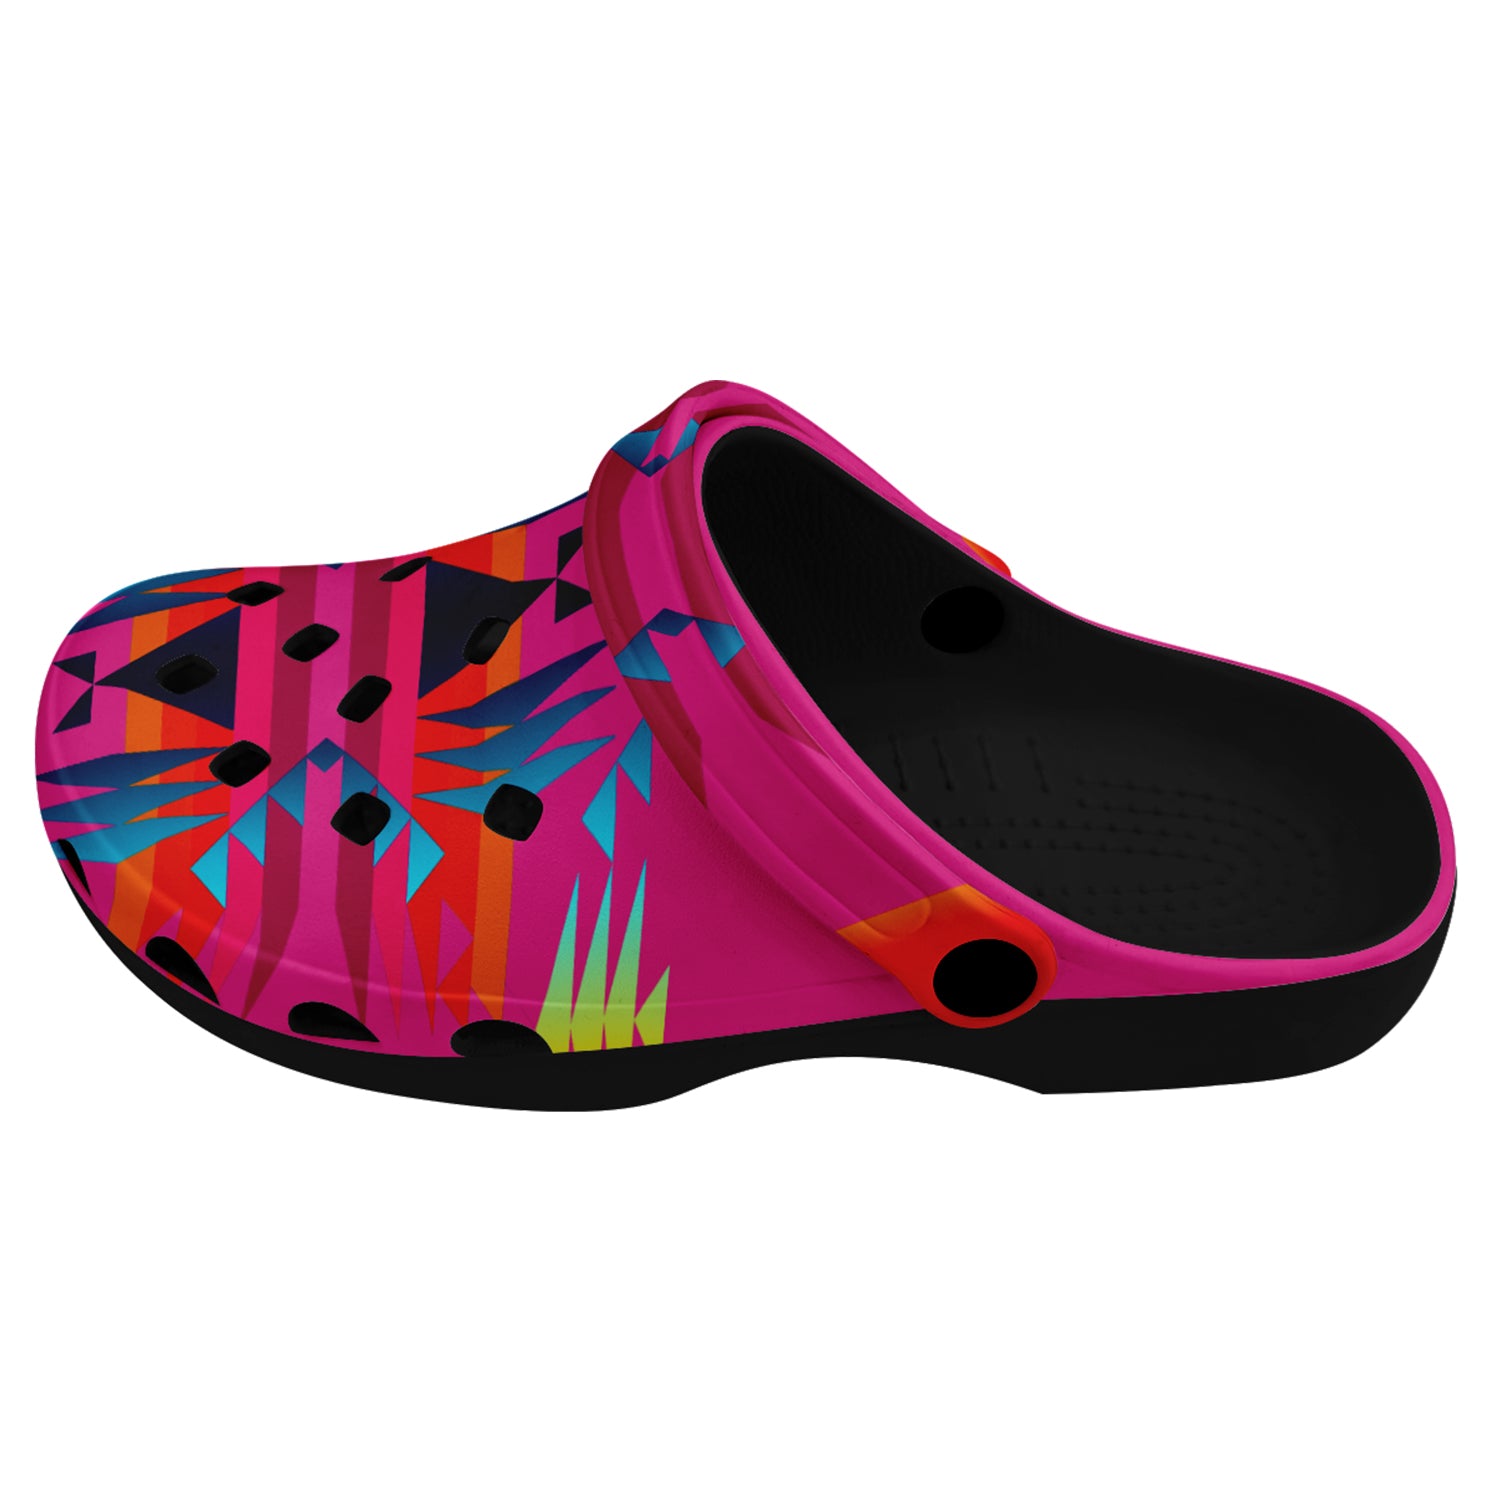 Between the Mountains Pink Muddies Unisex Clog Shoes